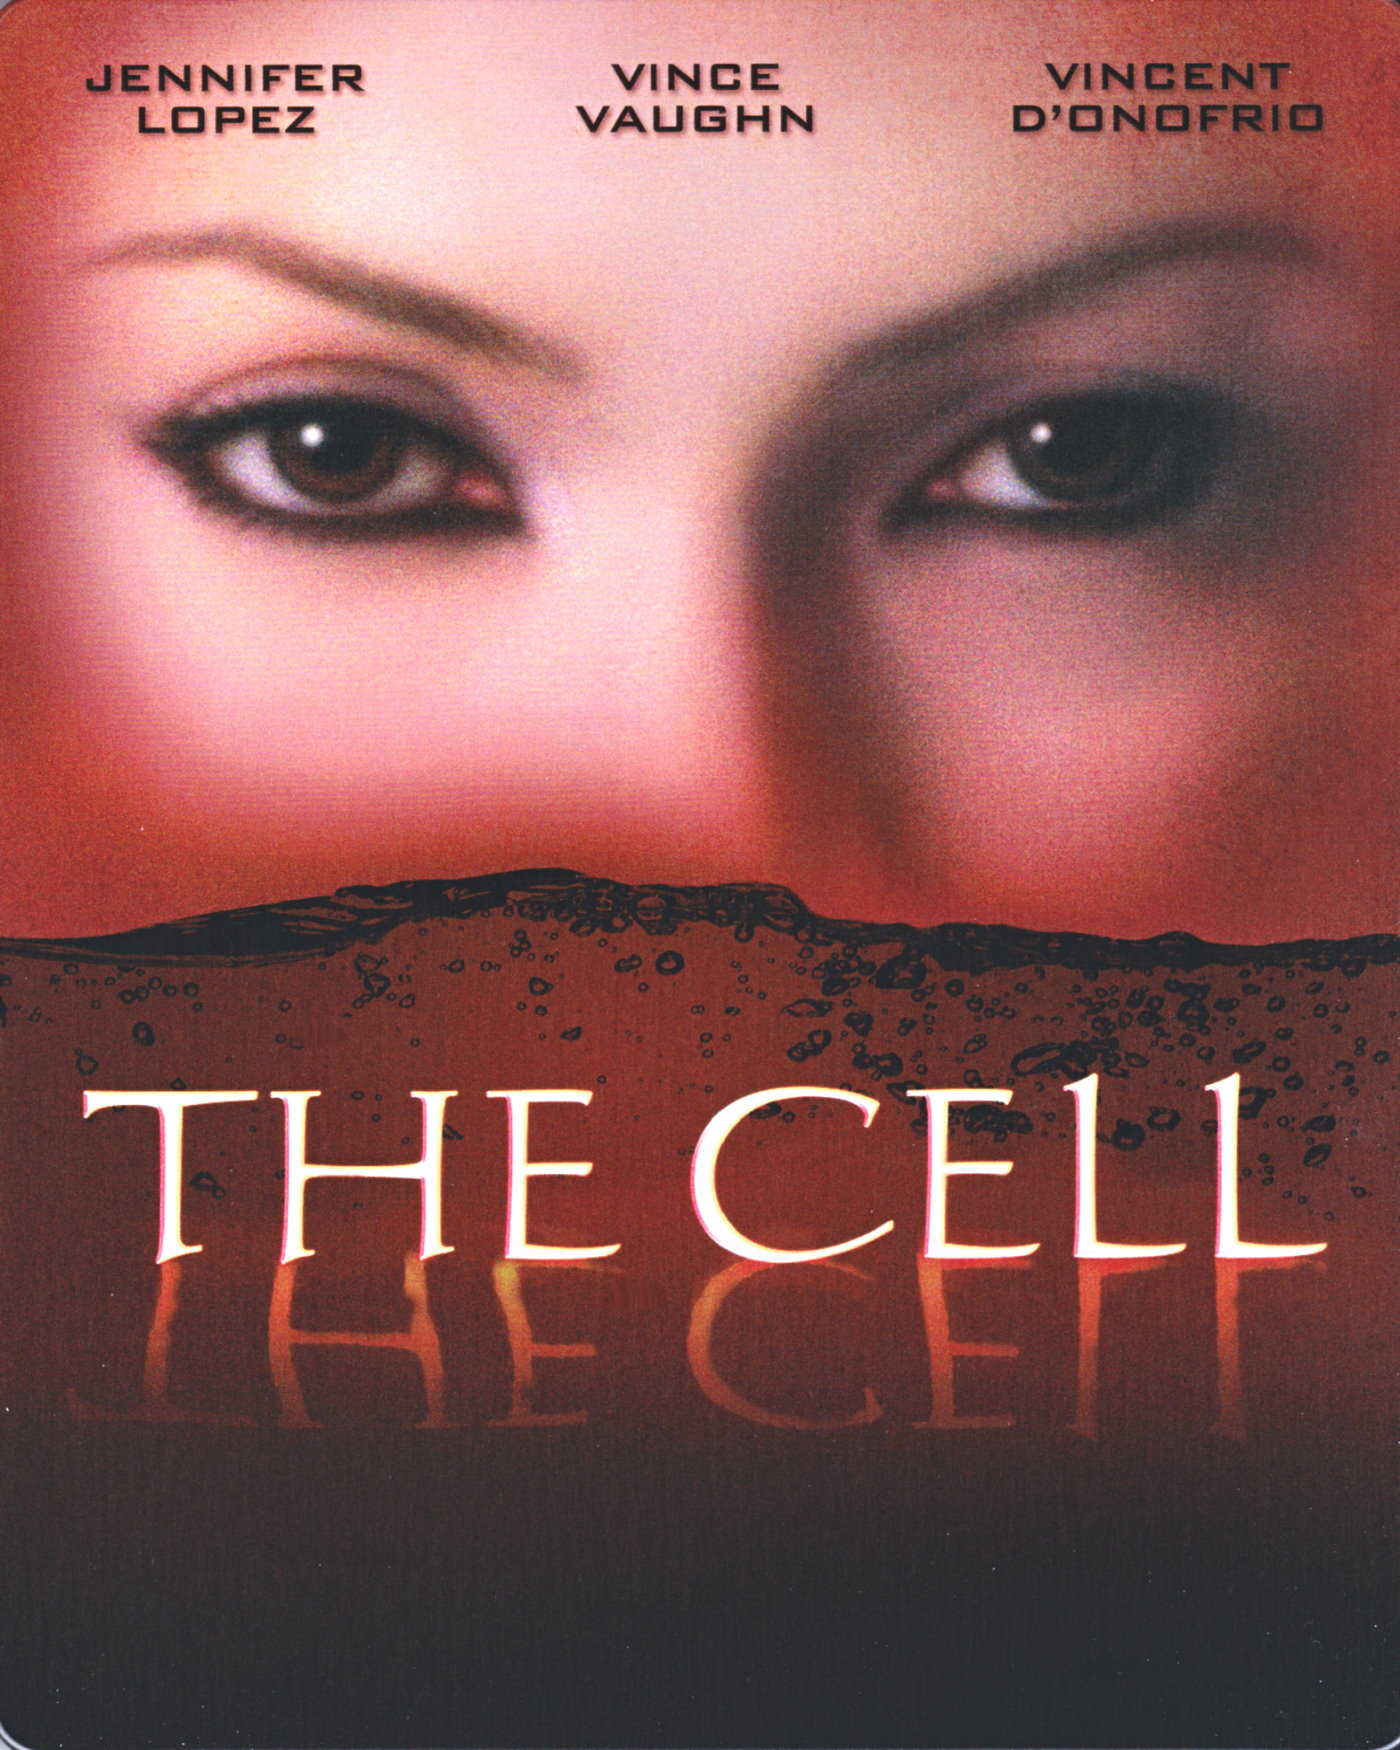 Cover - The Cell.jpg